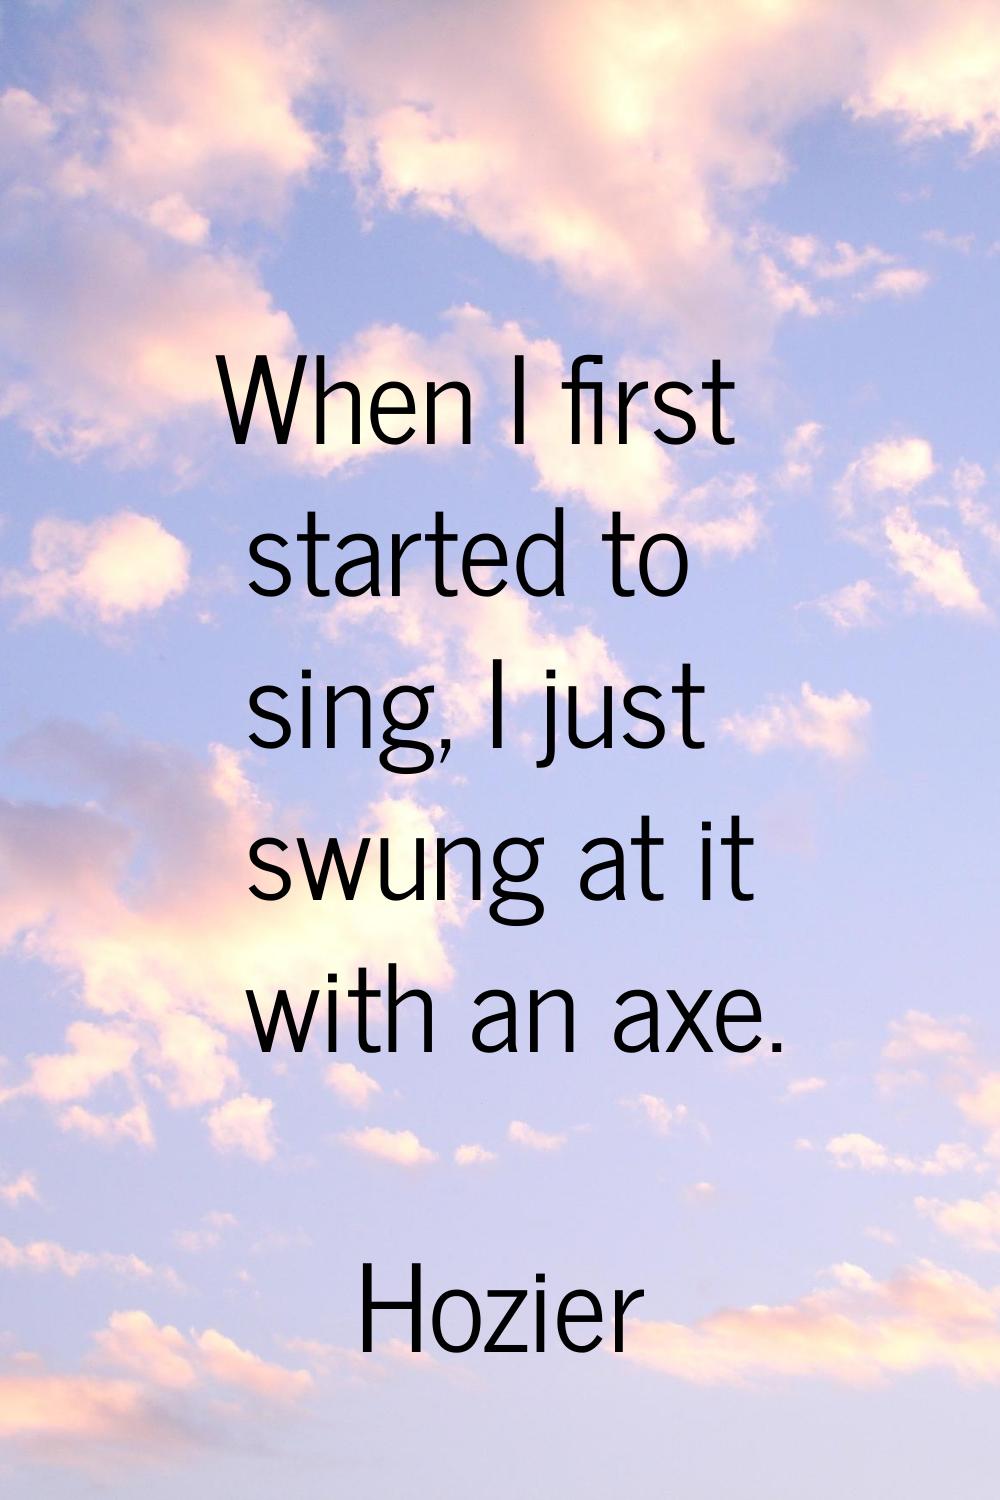 When I first started to sing, I just swung at it with an axe.